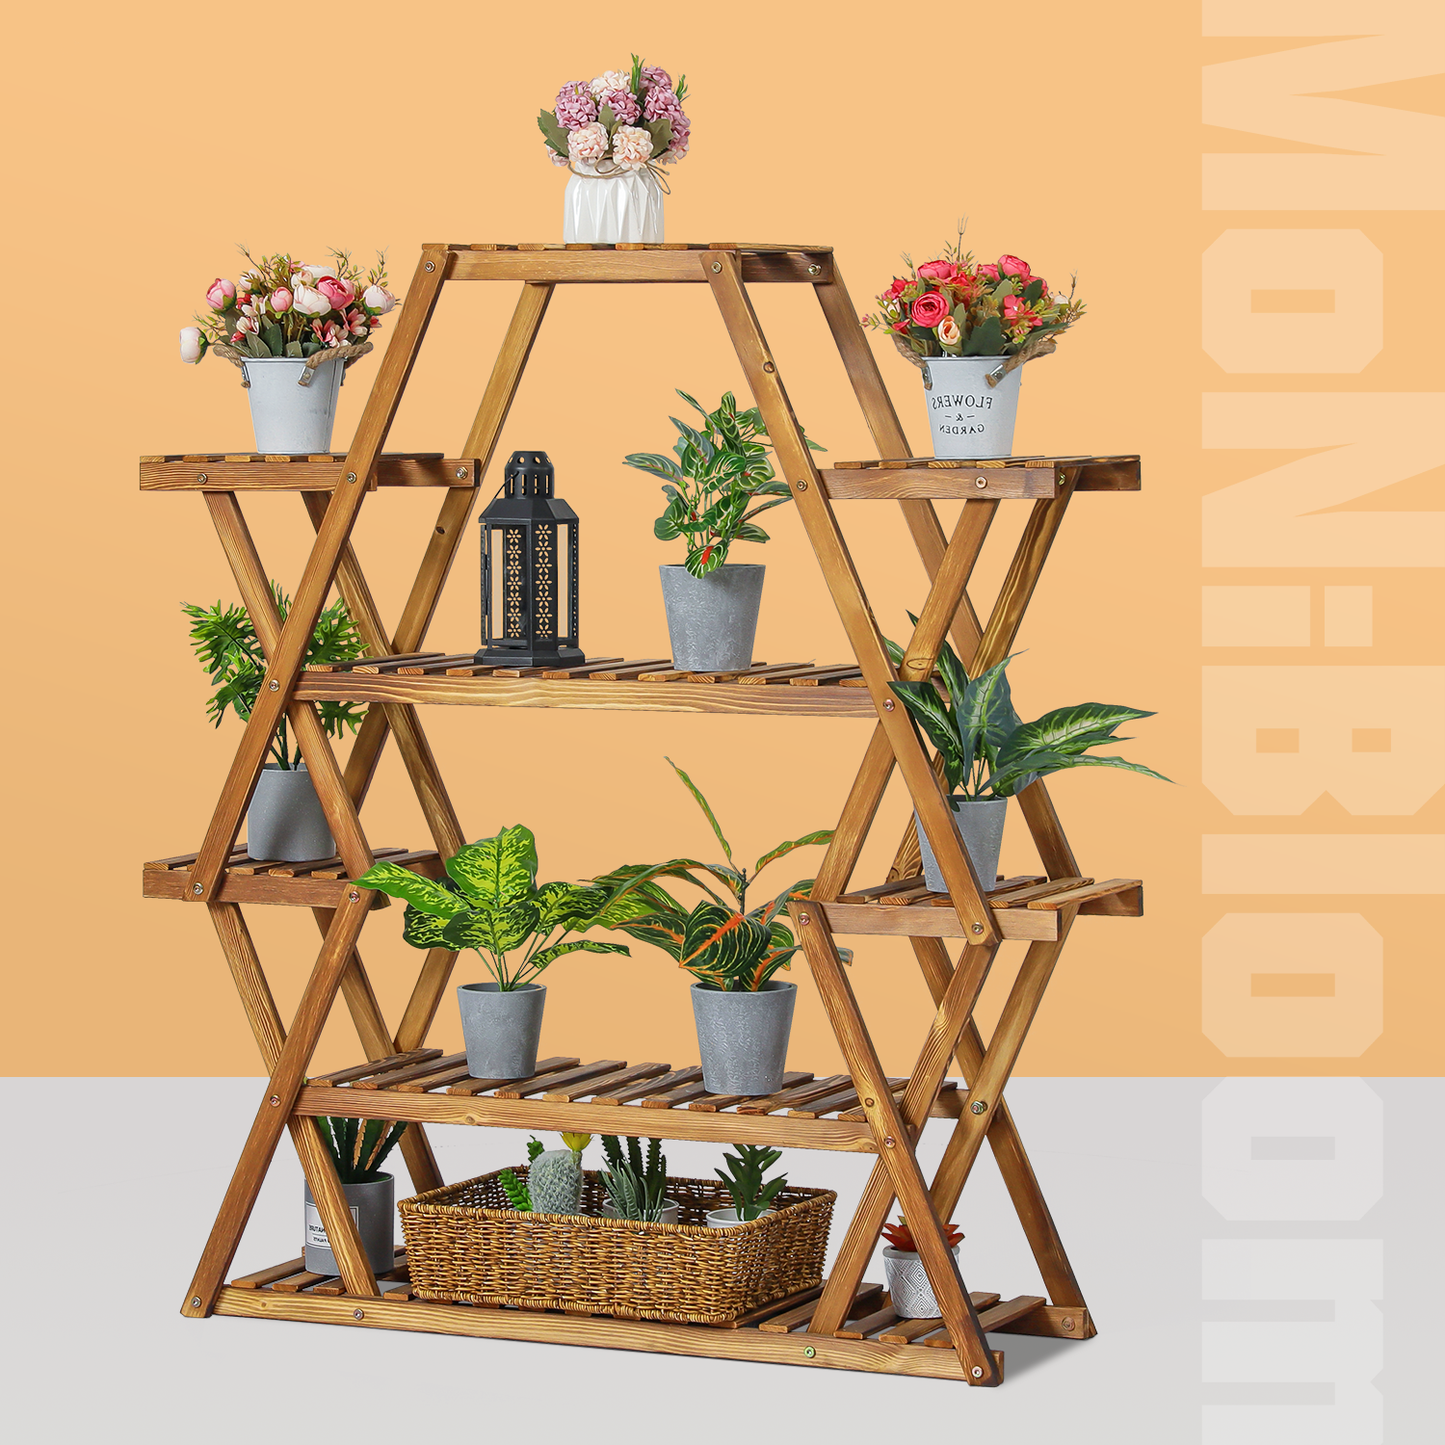 Flower Plant Stand Display Shelf - Zip-Zag Layer - 13 Potted Plant Holder - Carbonized